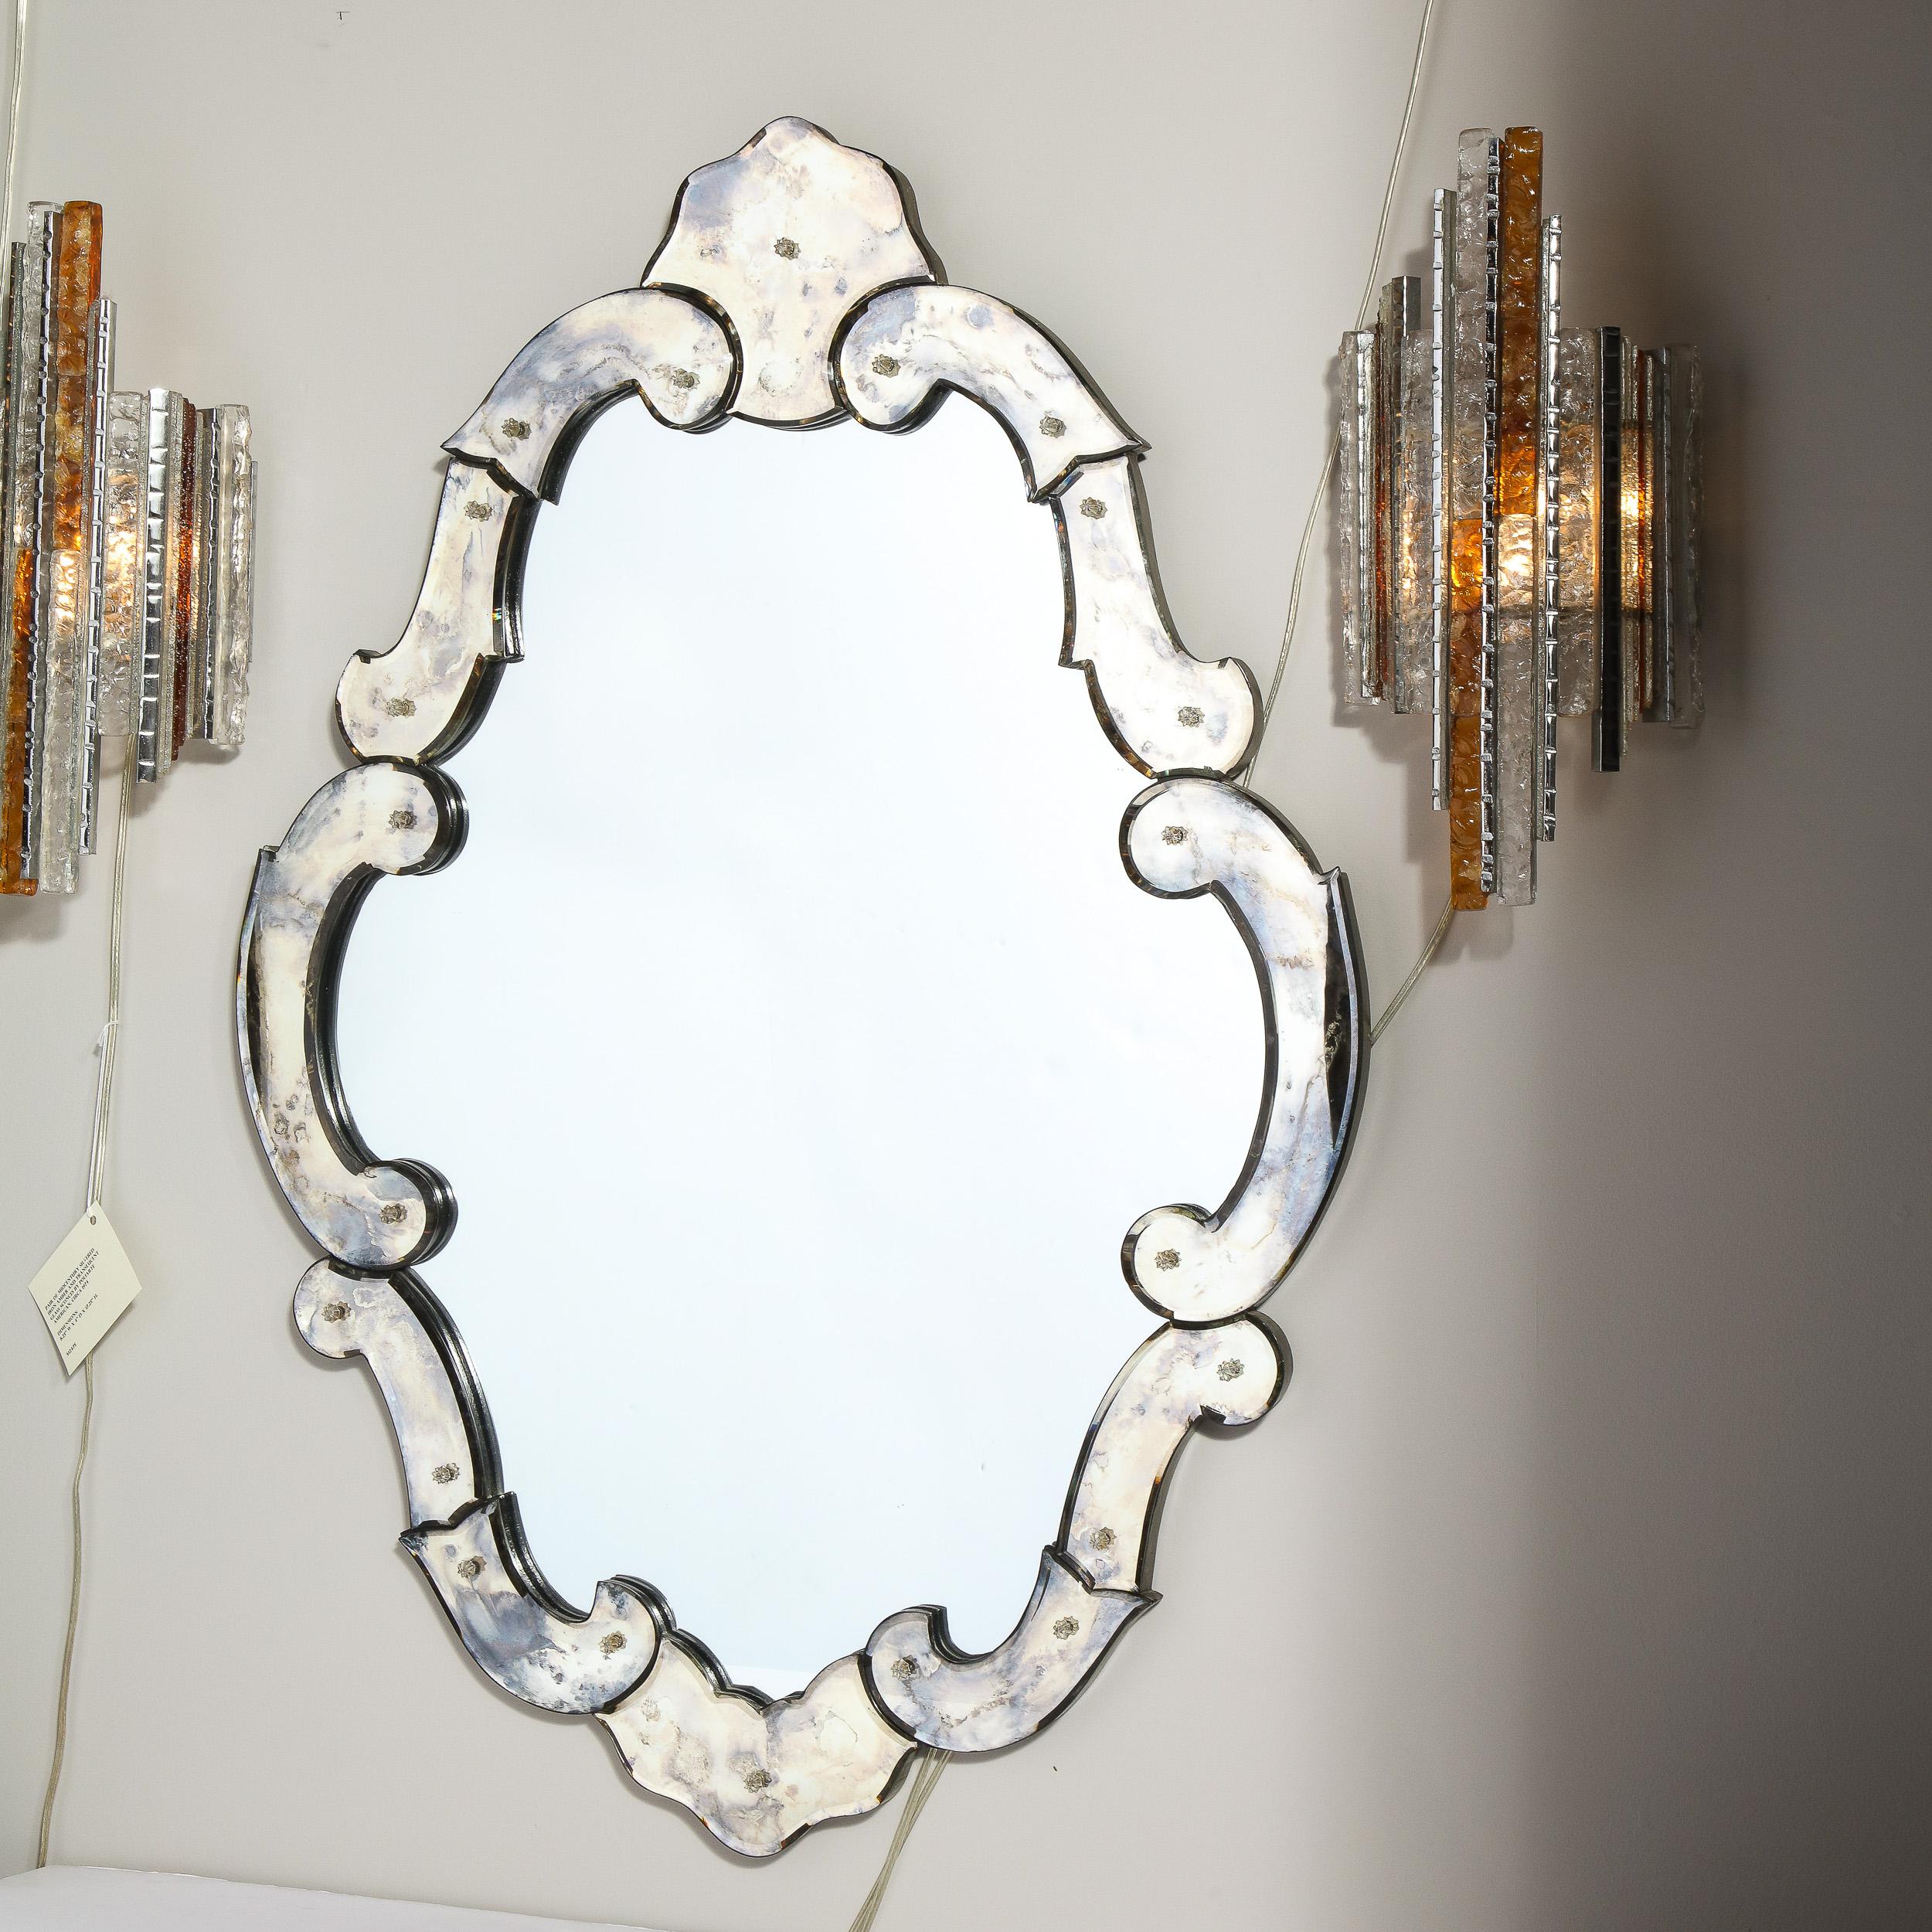 This elegant early Mid-Century Modern/ Hollywood cartouche wall mirror was realized in the United States, circa 1945. It features a cartouche form composed of an abundance of stylized demilune smoked and antiqued mirrored pieces that create a